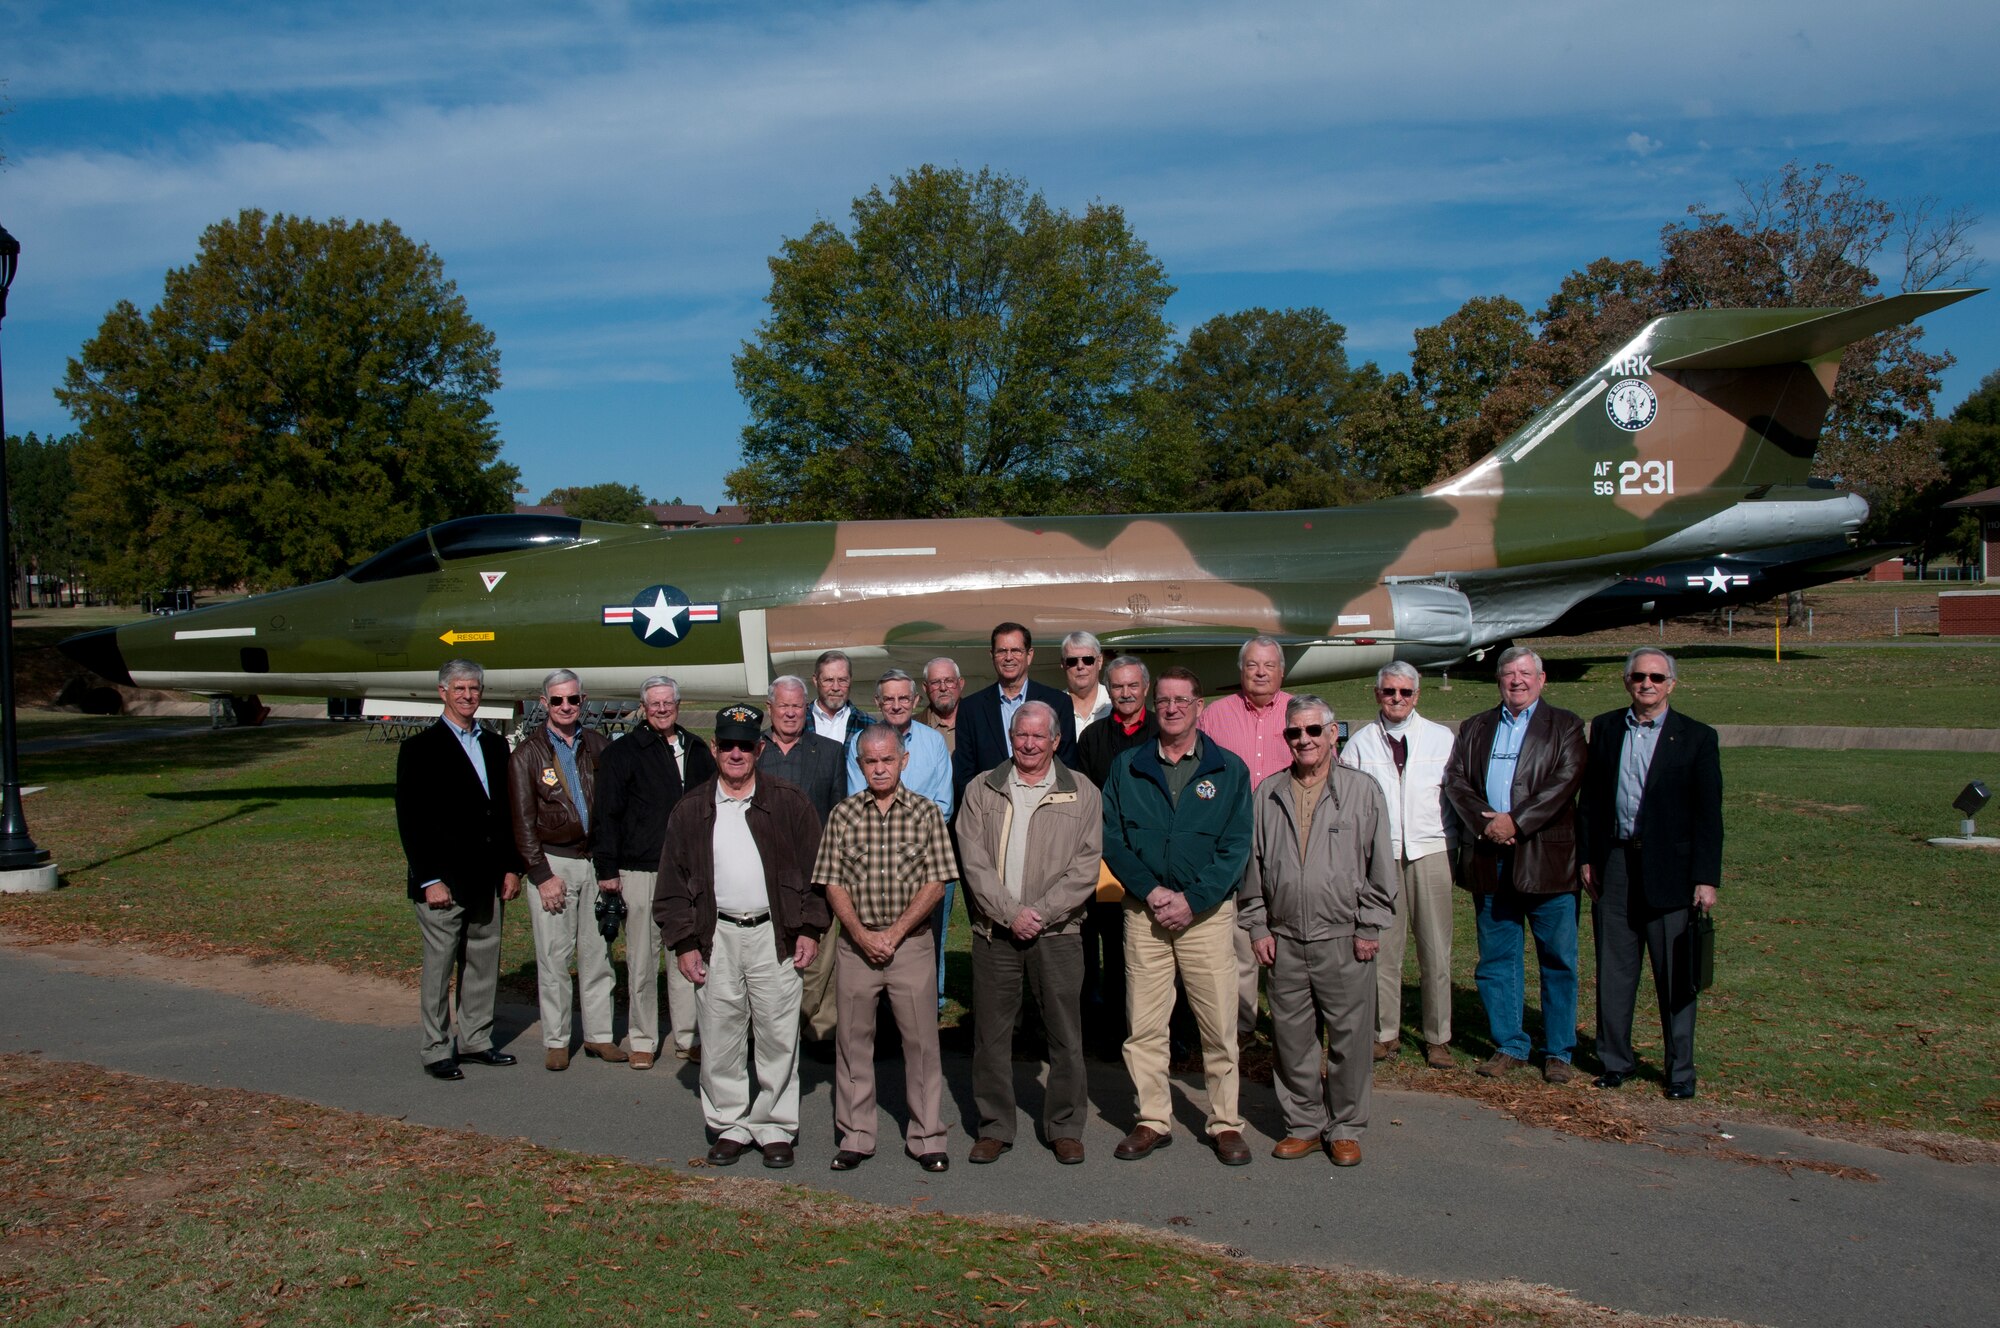 Retired maintainers and pilots that flew and worked on the RF-101 stand
in front of the recently moved static display at the Little Rock Air Force
Base Hertitage Air Park on Oct. 31, 2012. Over 20 of the aircrew attended
the ceremony and luncheon held at the air park and 189th Airlift Wing
Operations Group.